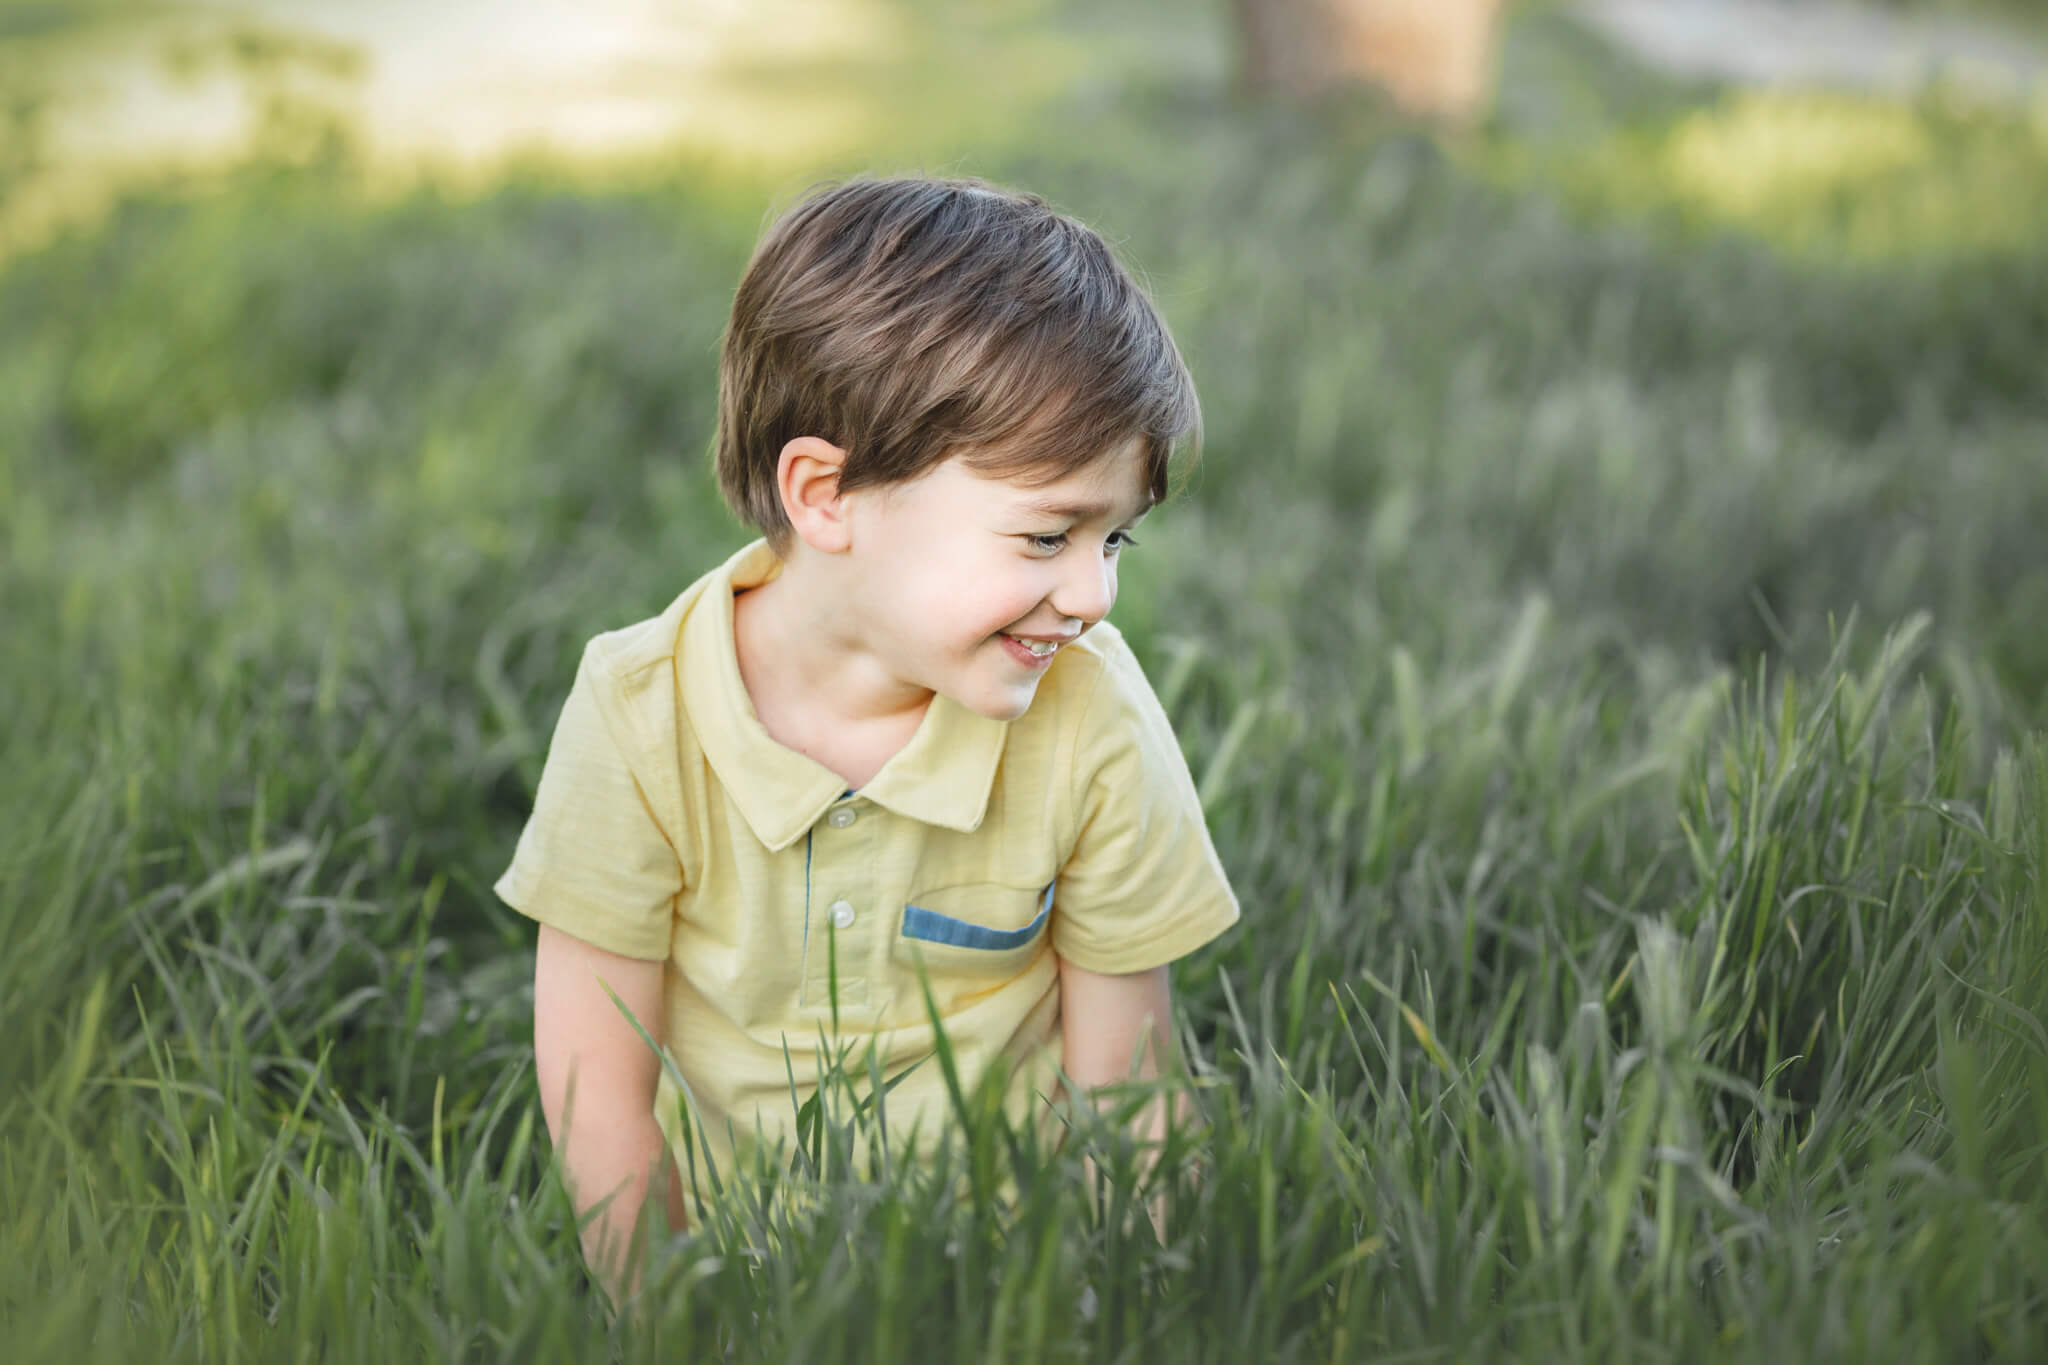 Little boy in the grass laughing, wearing a yellow shirt. - Pre Schools in Studio City